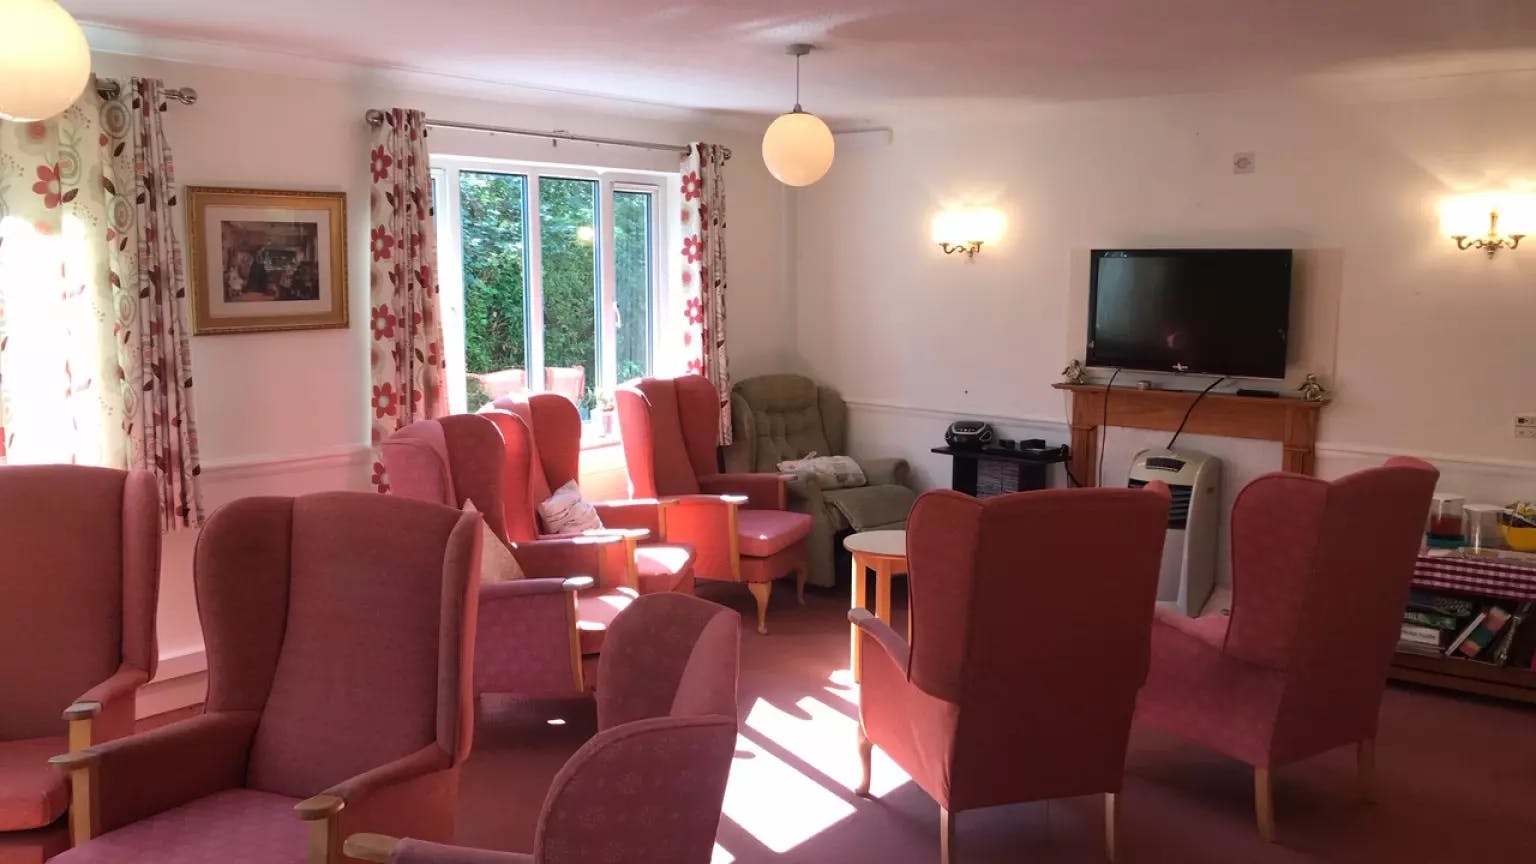 Lounge of Meresworth care home in Rickmansworth, Hertfordshire